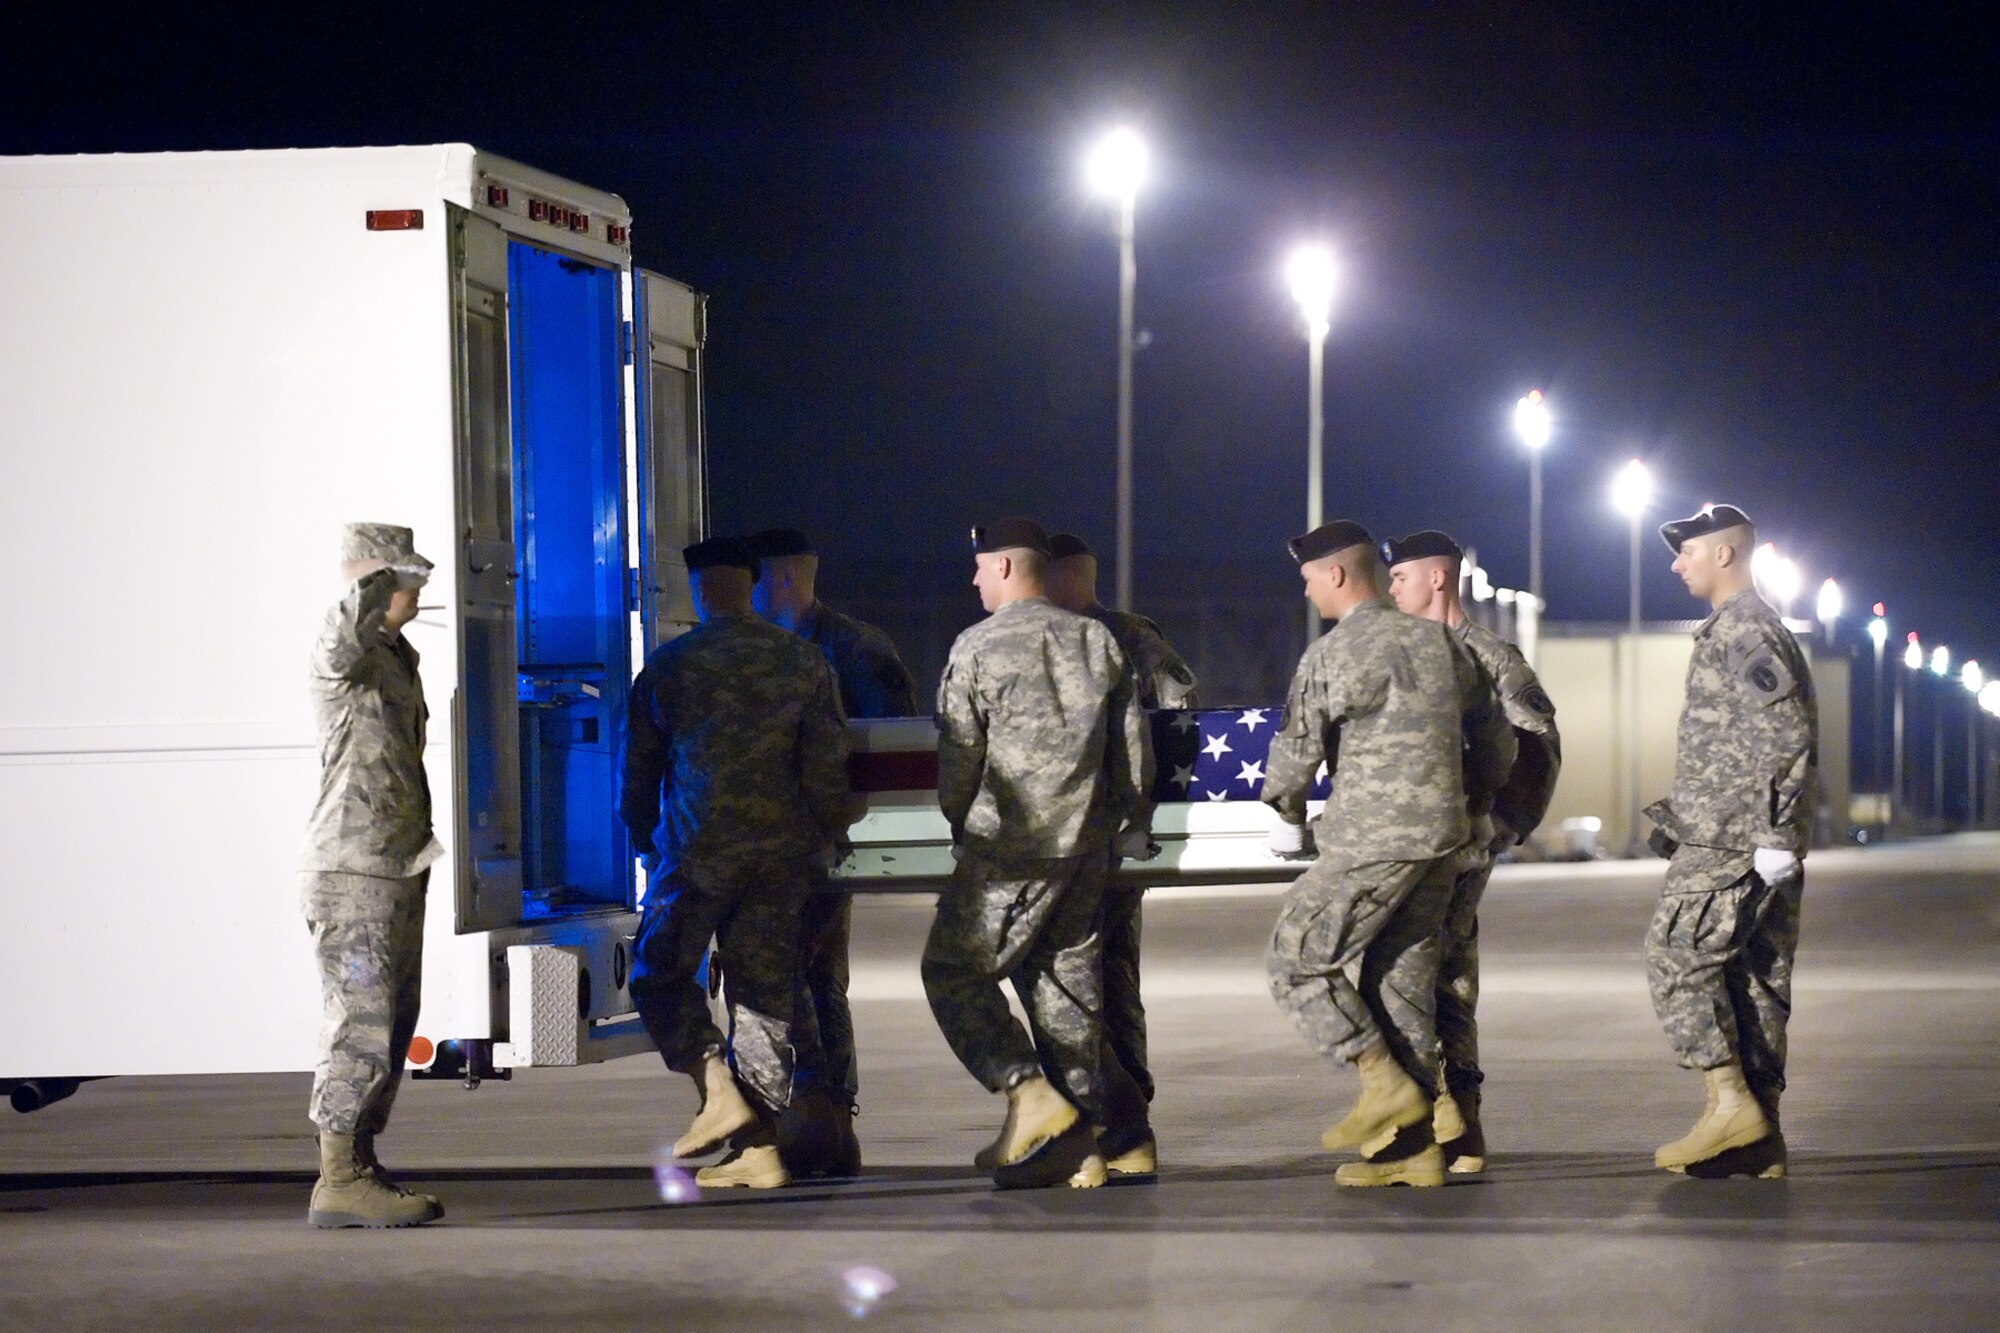 A U.S. Army carry team transfers the remains of Army Pfc. William A. Blount of Petal, Miss., at Dover Air Force Base, Del., on April 9, 2010. He died April 7 in Mosul, Iraq, when enemy forces attacked his vehicle with an improvised explosive device. Blount was assigned to the 1st Battalion, 64th Armor Regiment, 2nd Brigade Combat Team, Fort Stewart, Ga. (U.S. Air Force photo/Jason Minto)